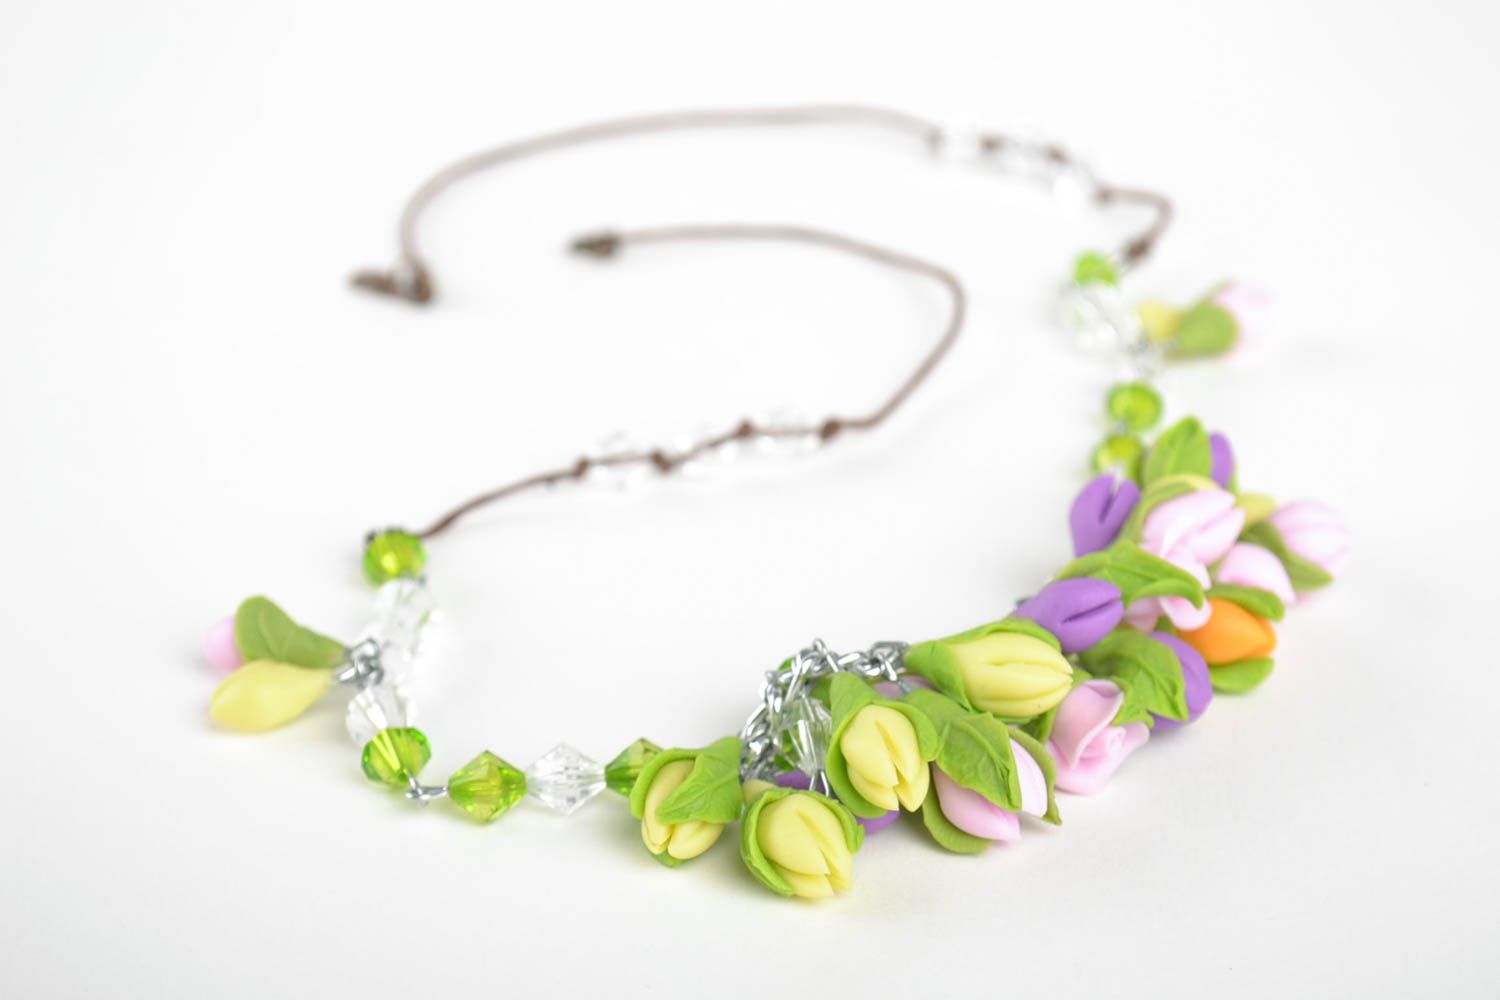 Handmade necklace flower necklace flower jewelry fashion accessories cool gifts photo 4